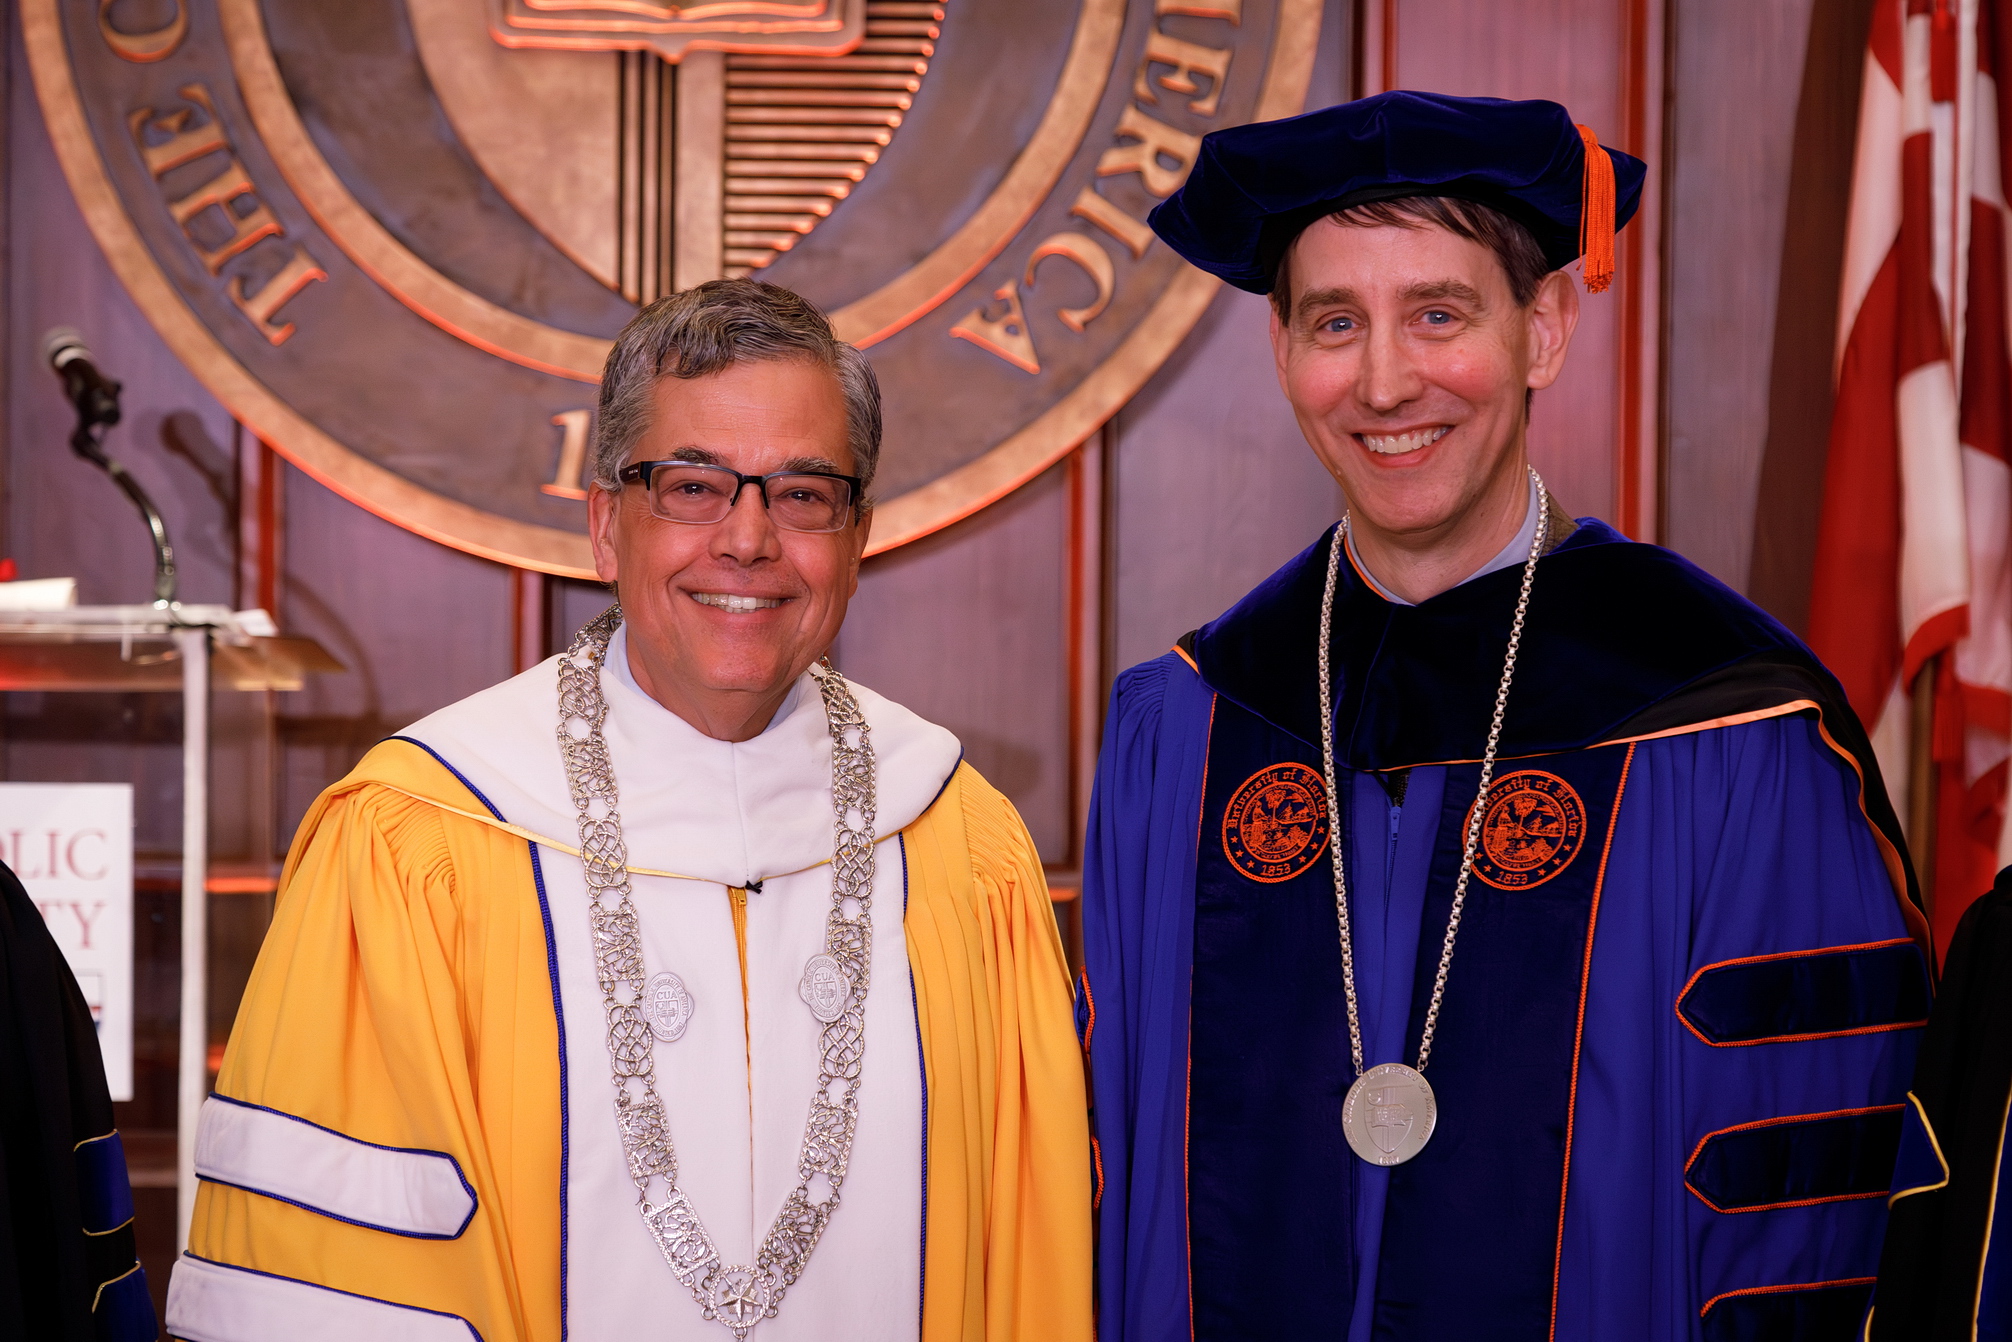 School of Engineering Celebrates the Installation of Dr. Jeffrey Herrmann as the St. Abbo of Fleury Endowed Chair in Engineering